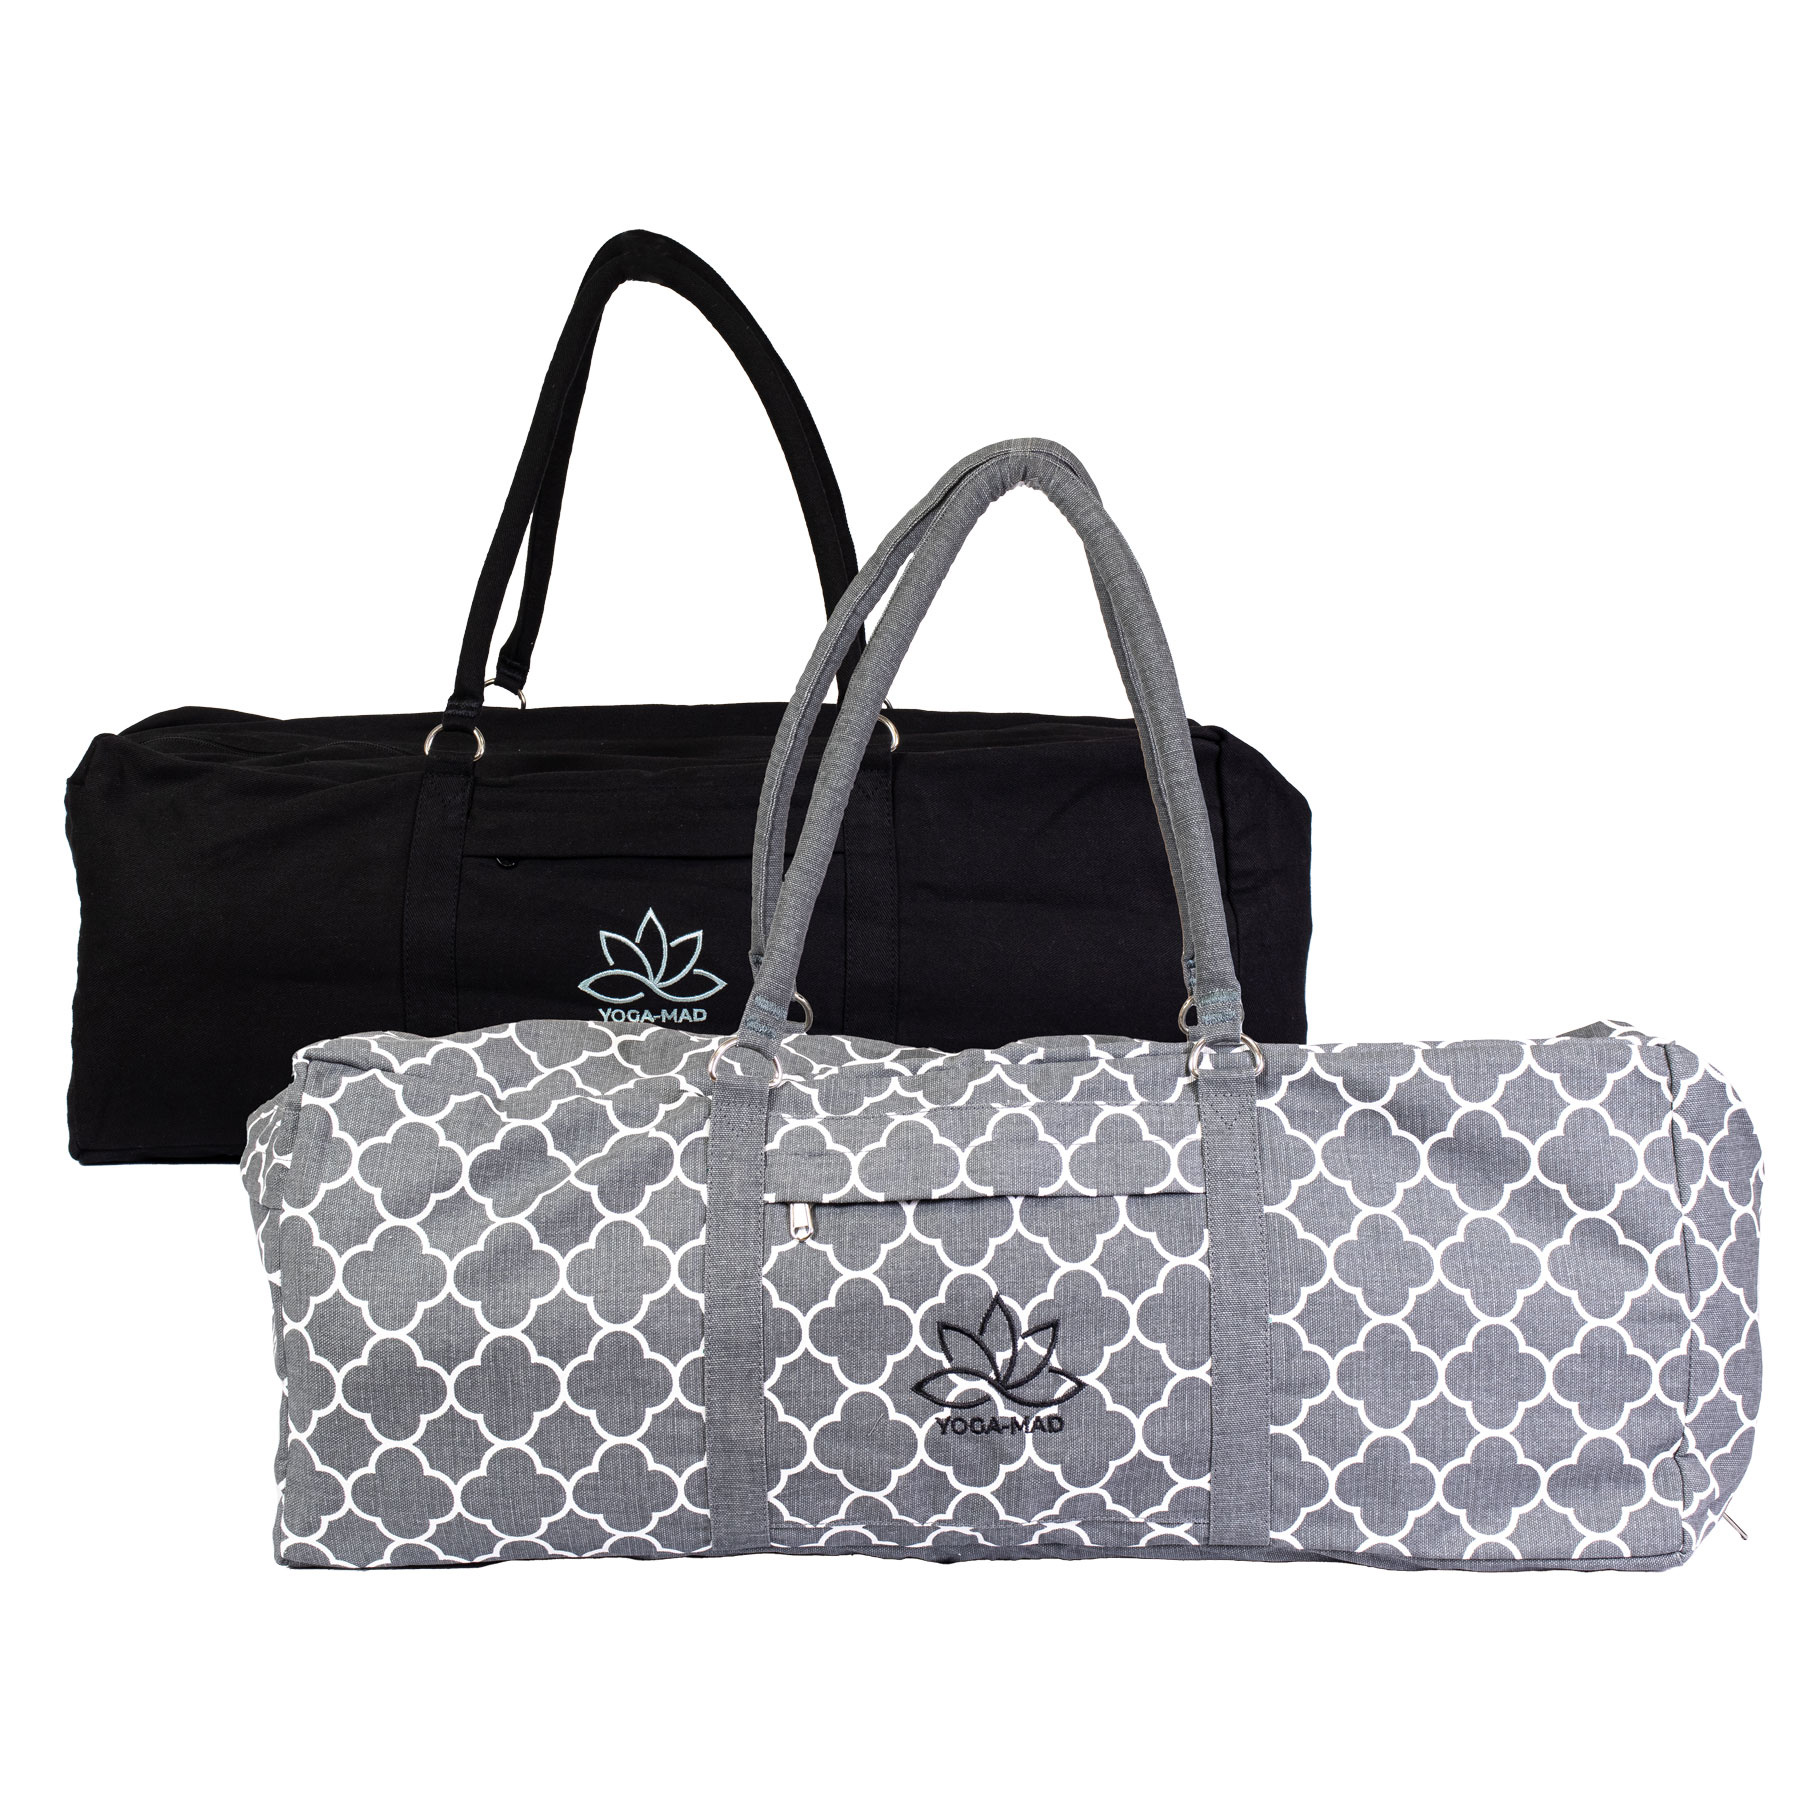 Pilates Bags & Carriers - Pilates - Mad-HQ